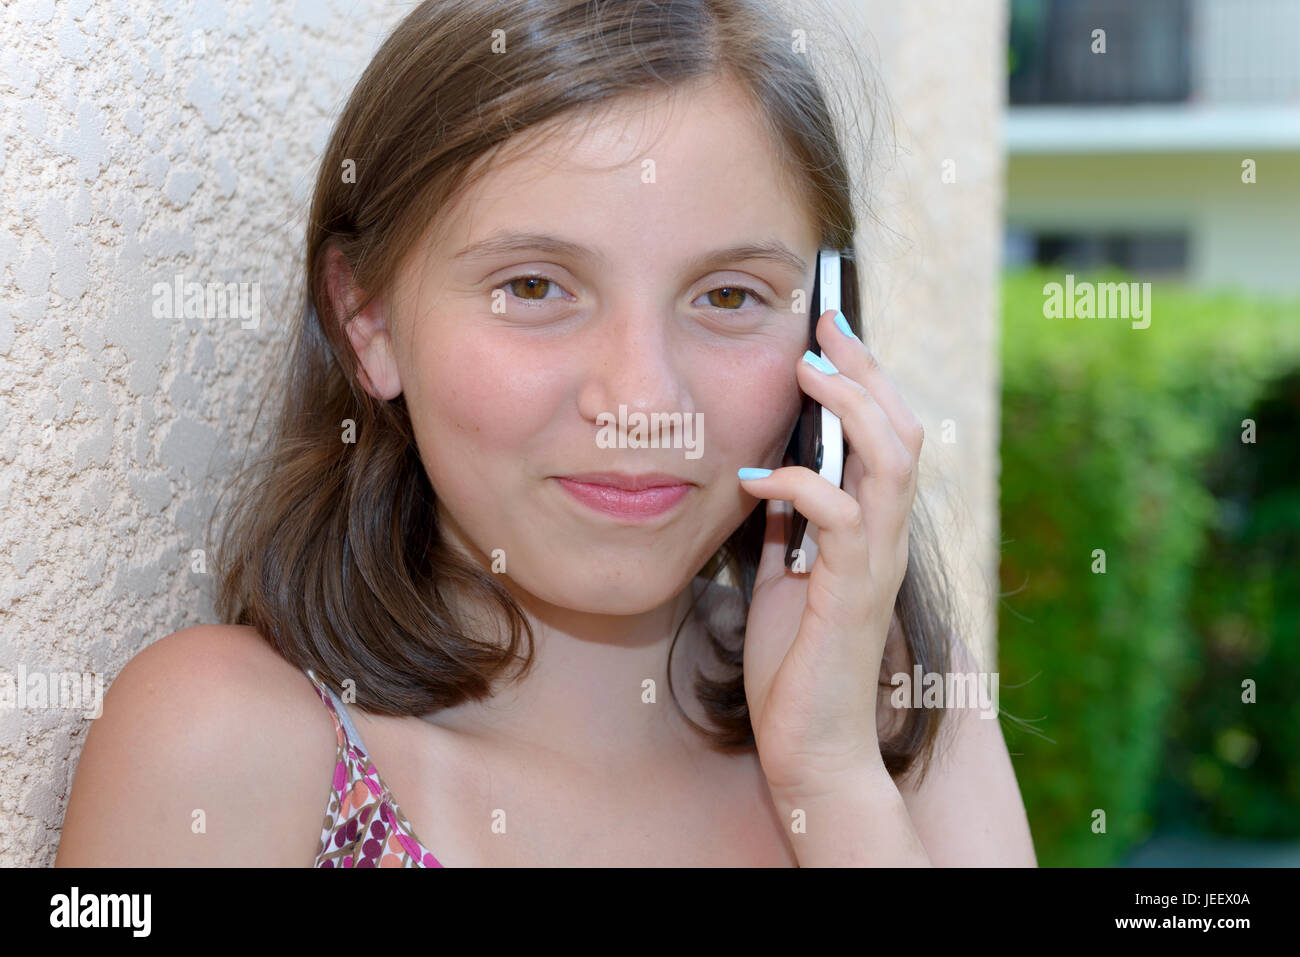 a smiling pre teenager girl calling on smartphone, outdoor Stock Photo